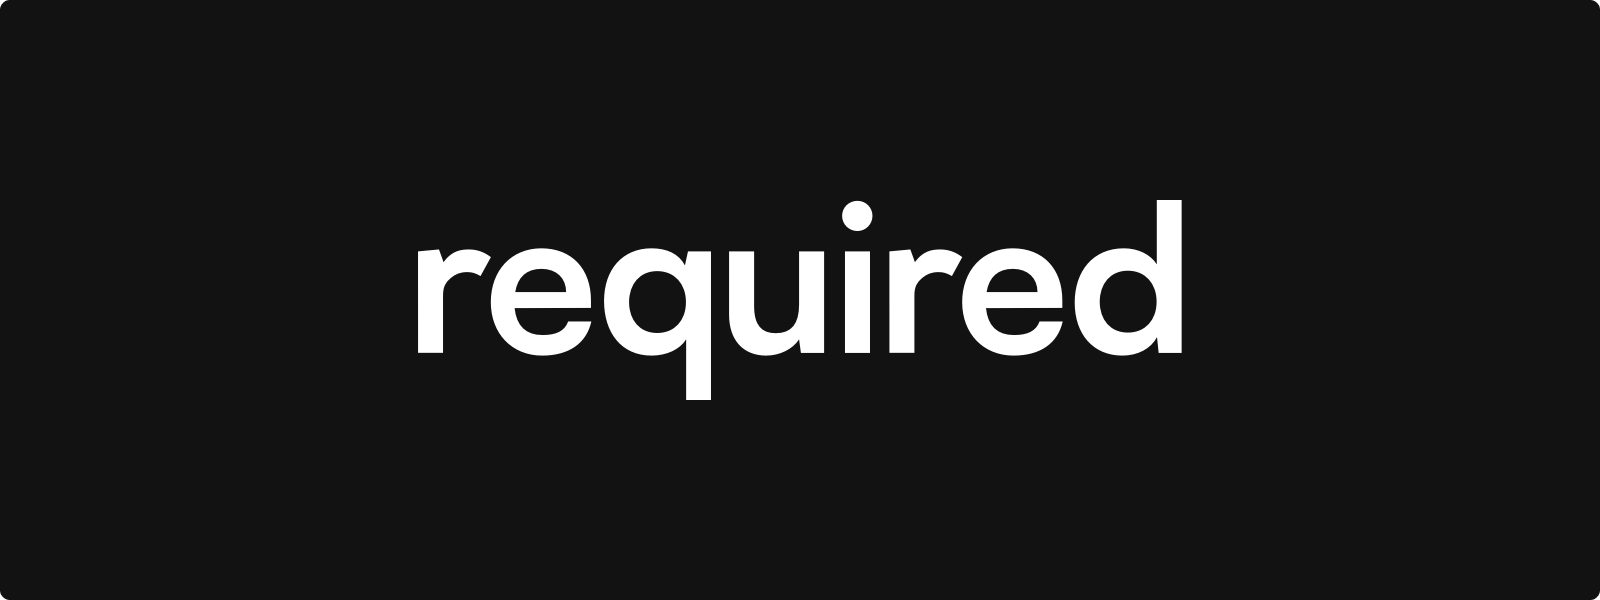 The new required logo type.